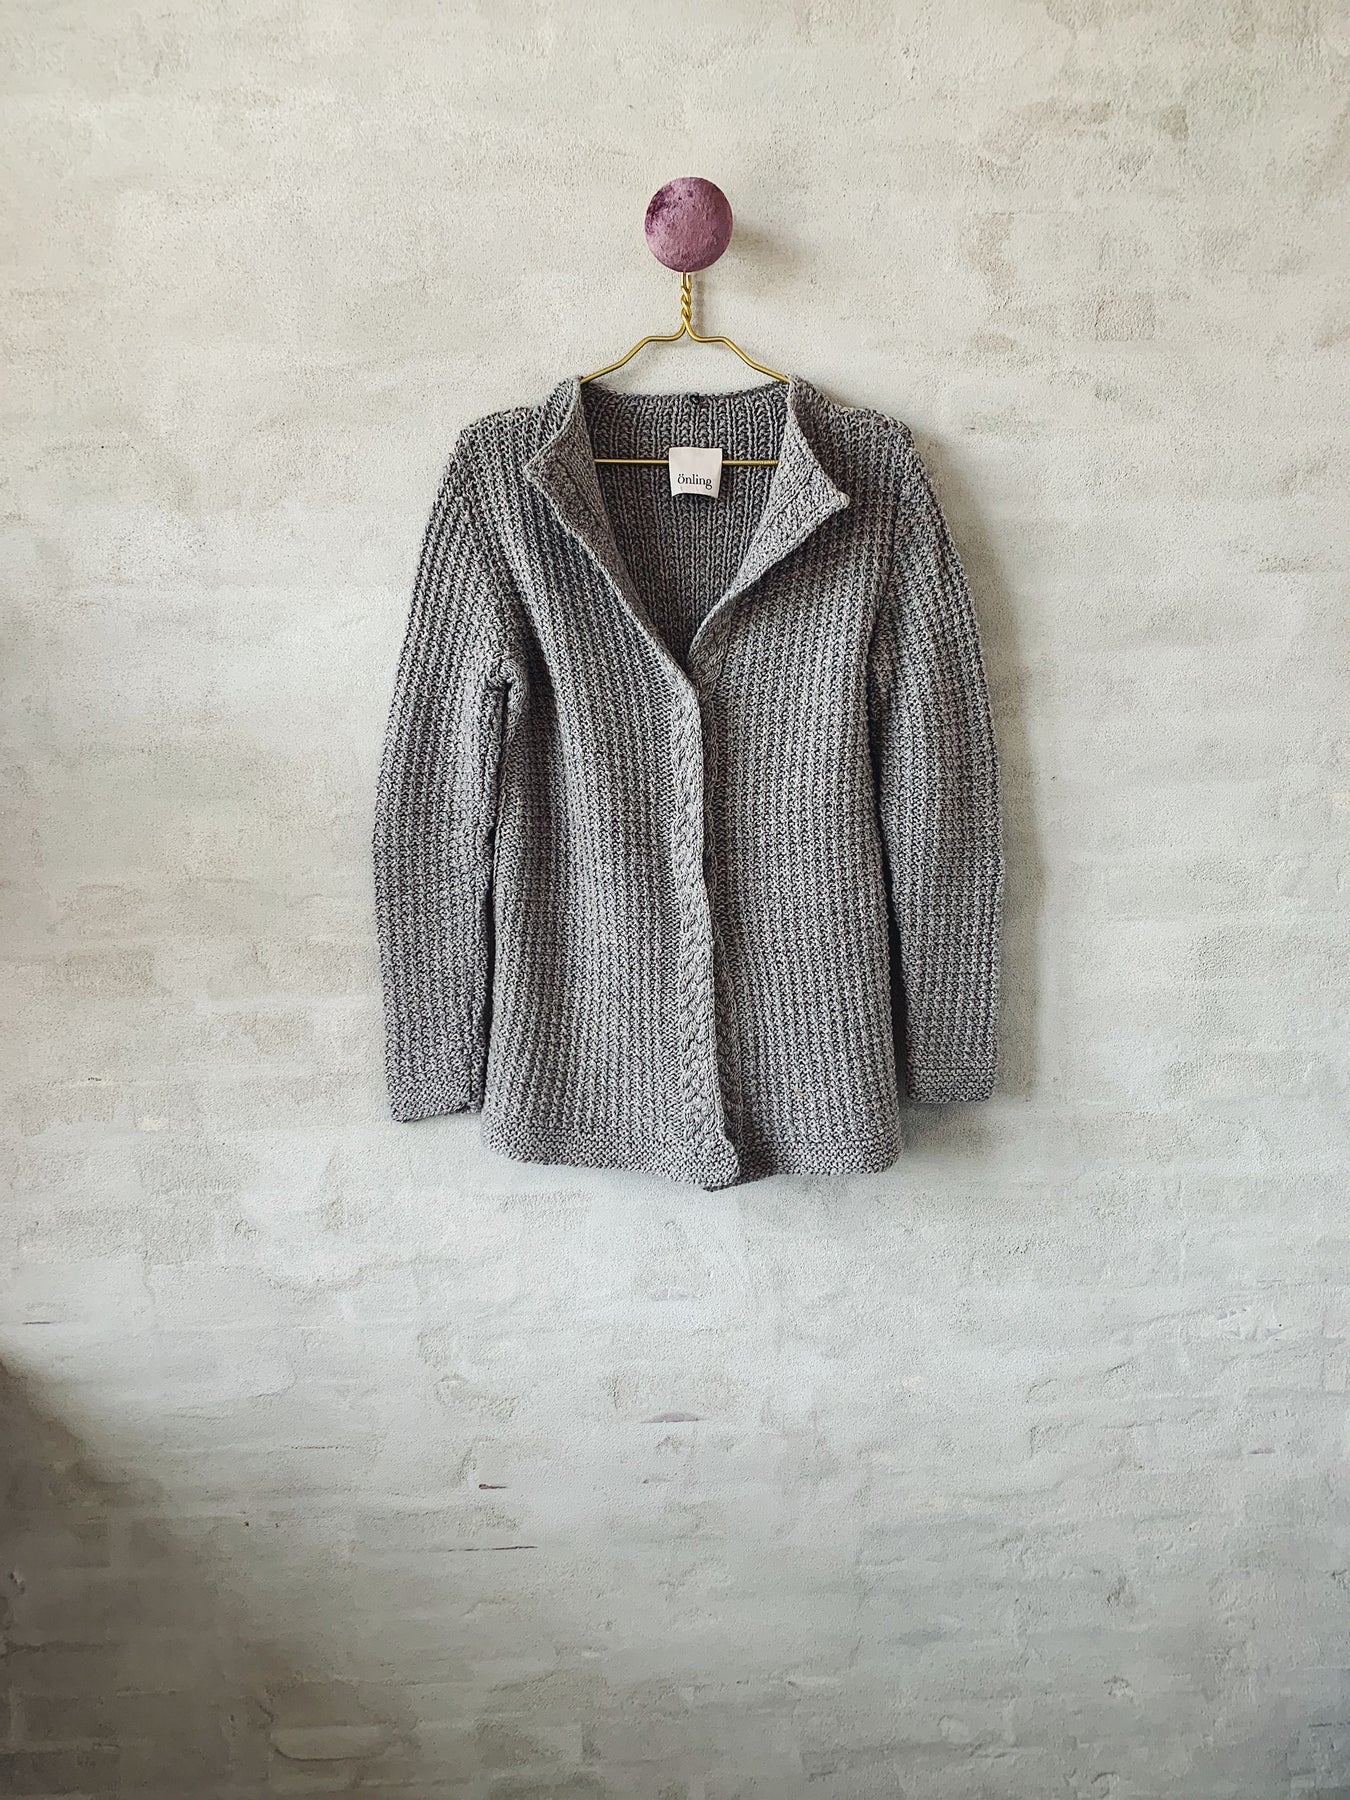 9 Free Cardigan Patterns Knit from the Bottom-Up — Blog.NobleKnits